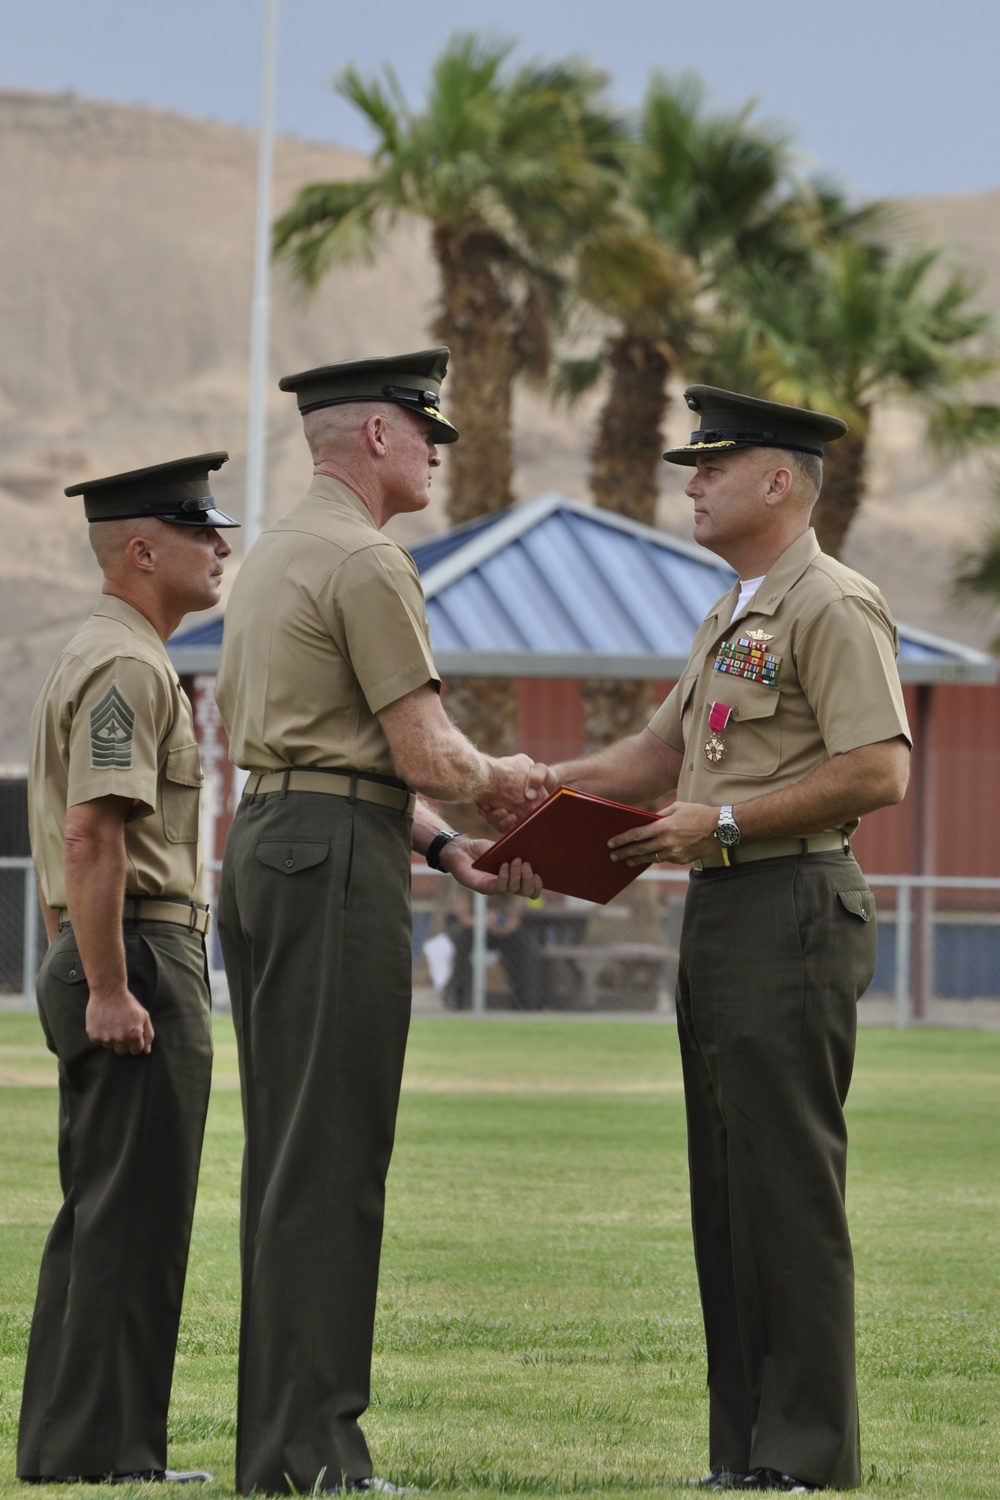 Brig. Gen. Edward Banta, commanding general Marine Corps Installations West, Marine Corps Base Camp Pendleton congratulates Col. Michael L. Scalise after presenting him with the Legion of Merit for exemplary service